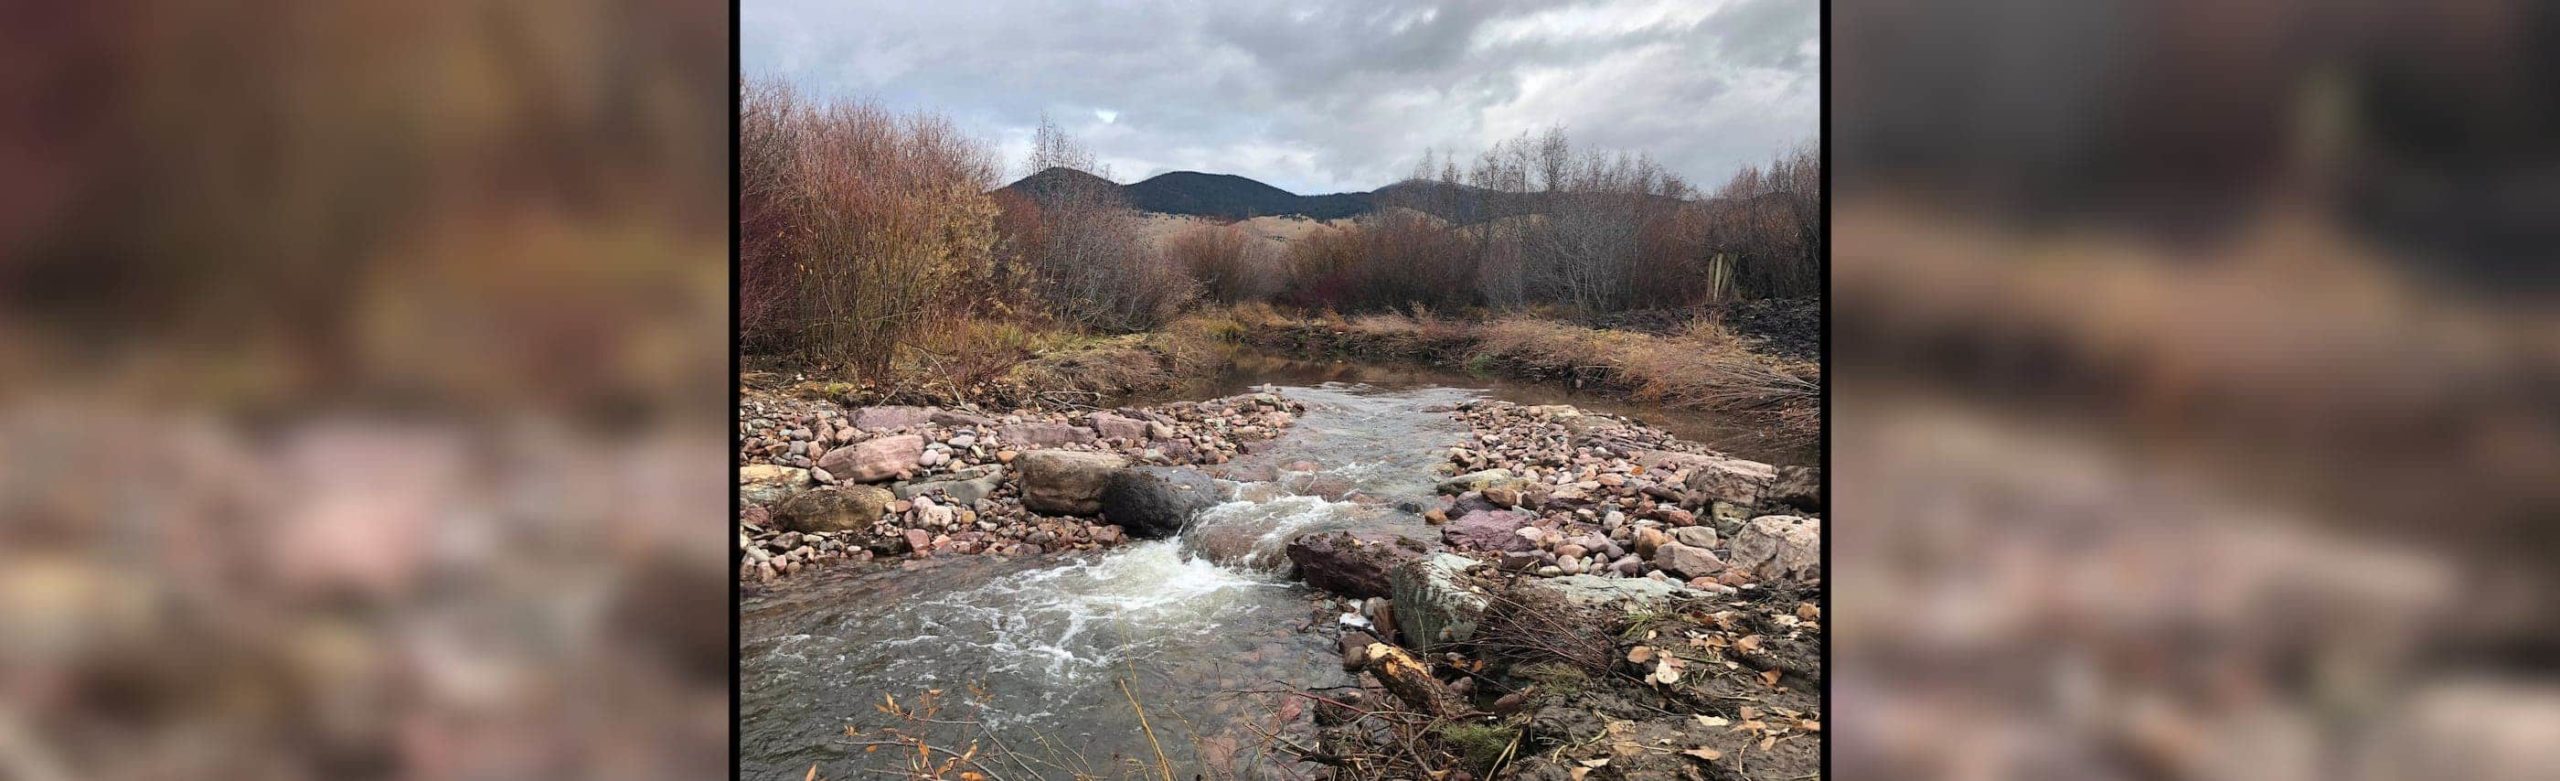 Blackfoot River Fund Update: MTU Launches First Project Image